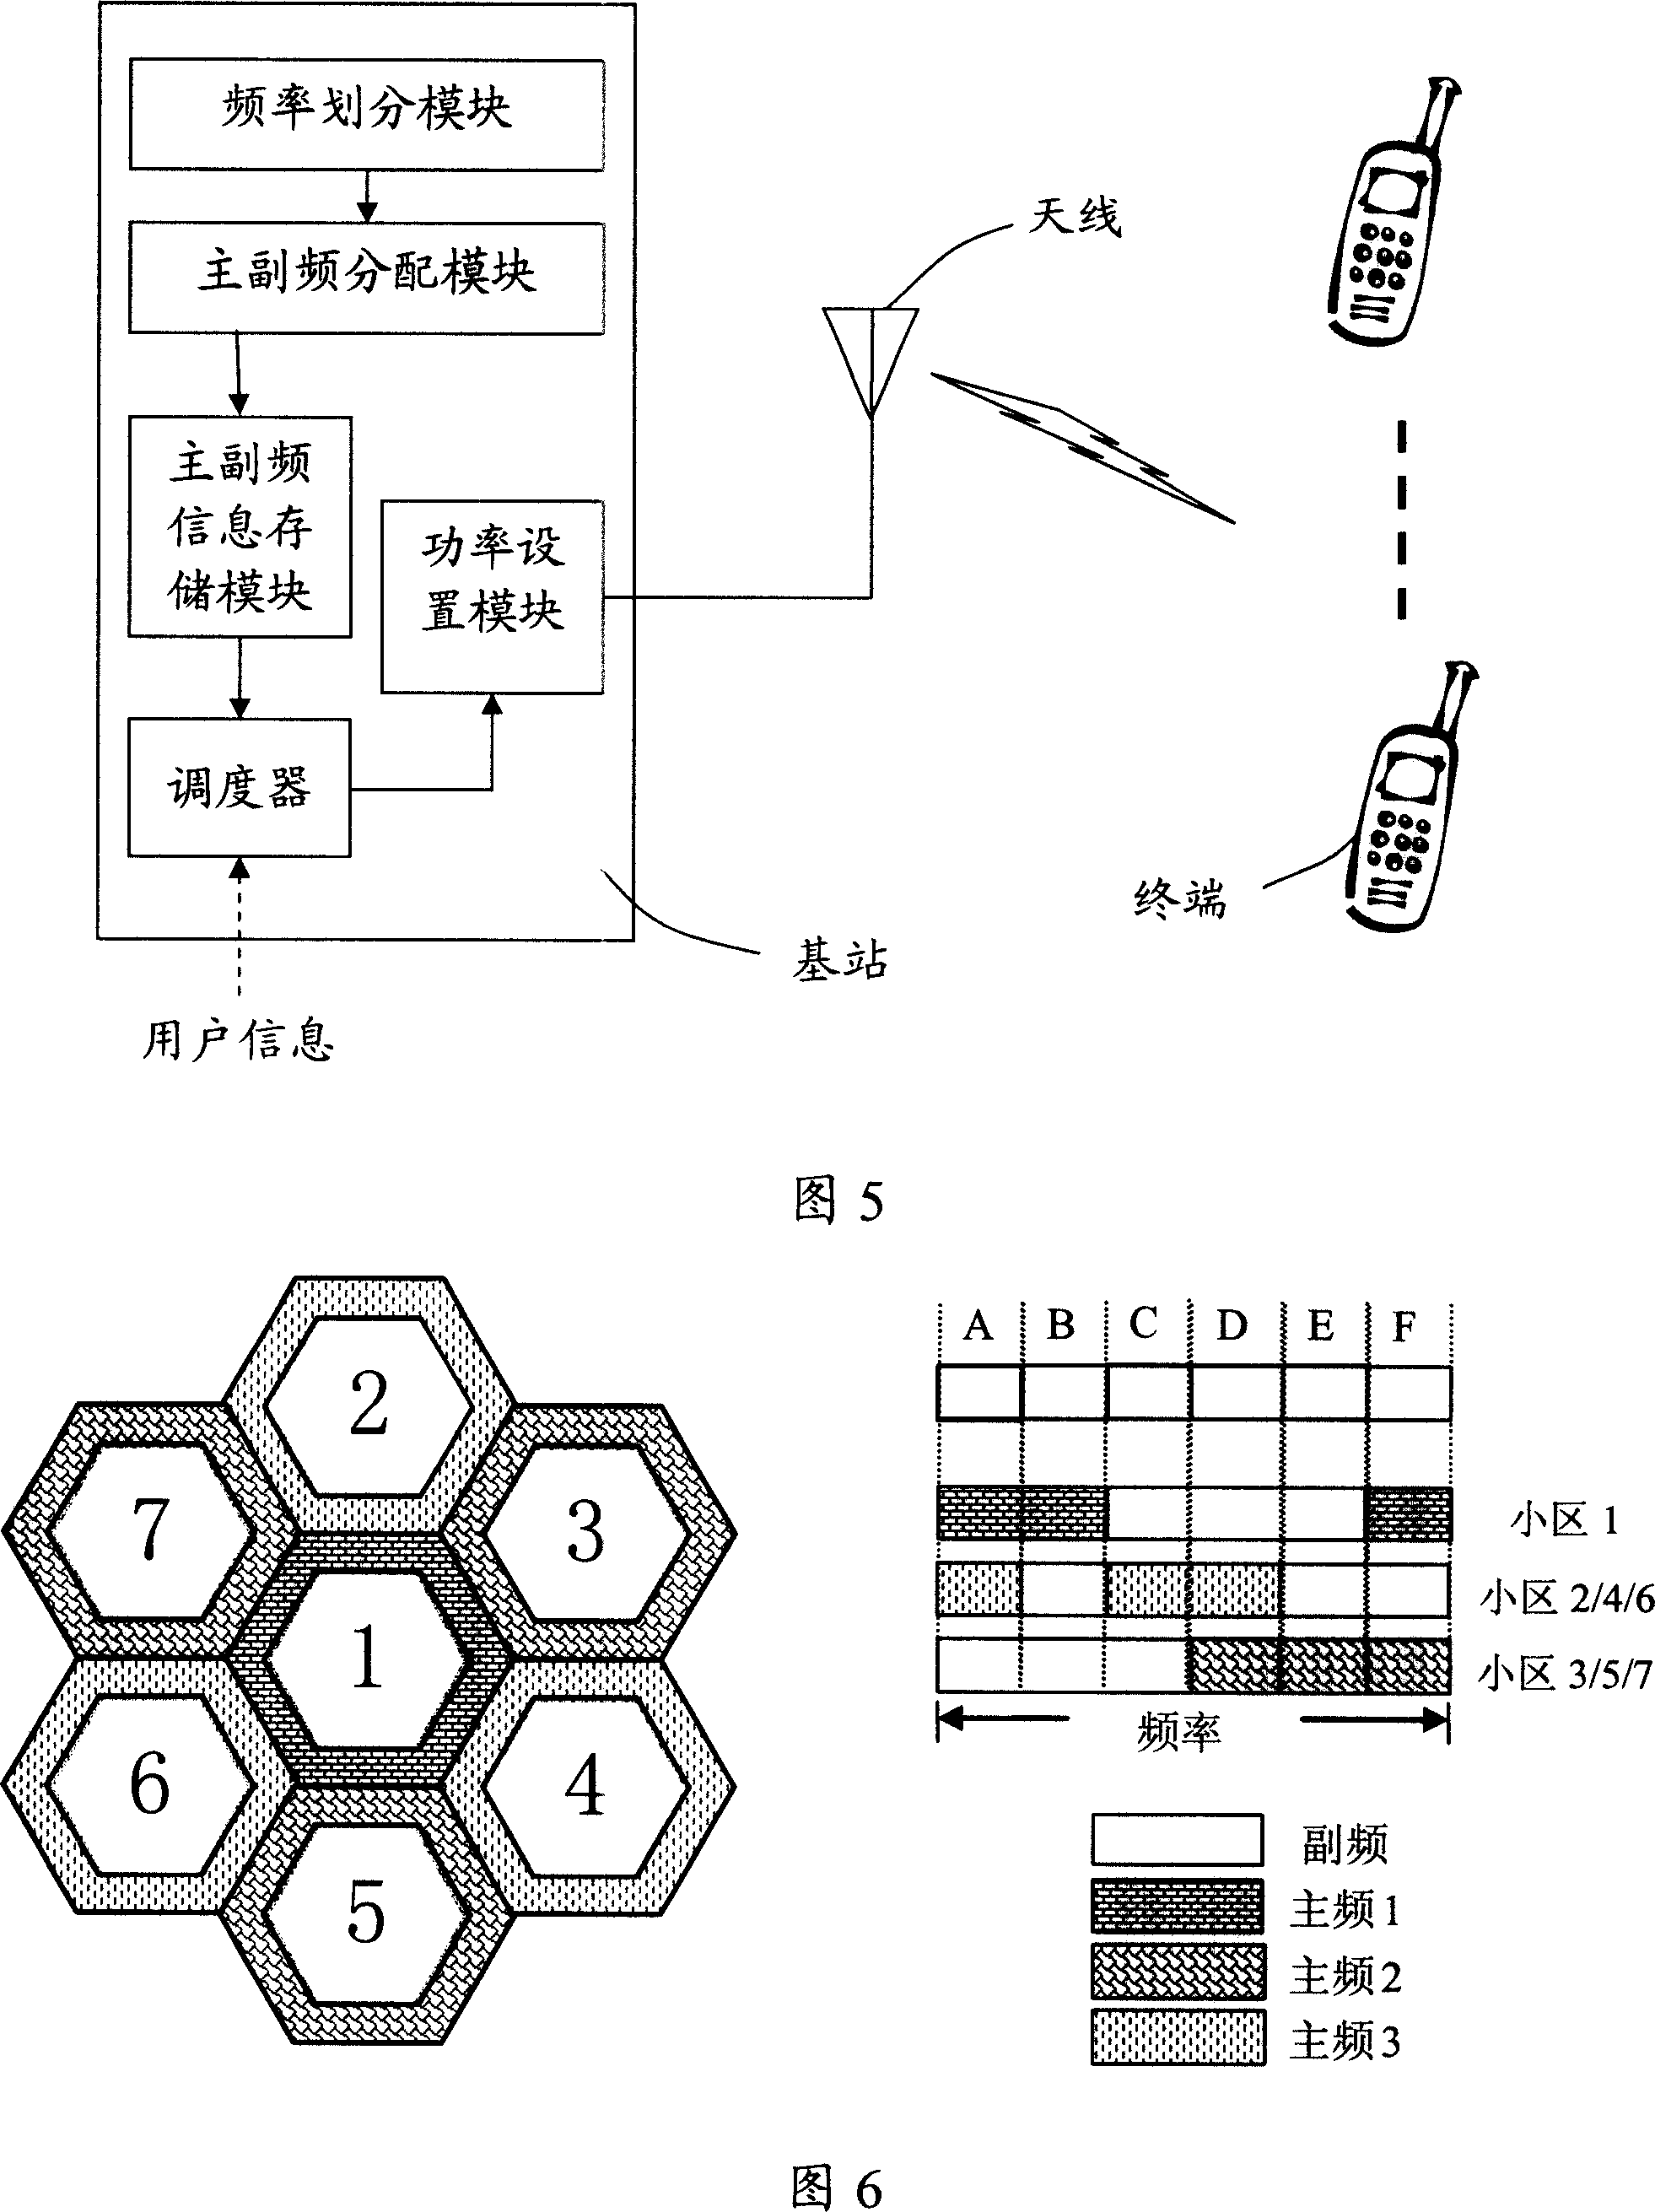 Frequency soft multiplexing system and method